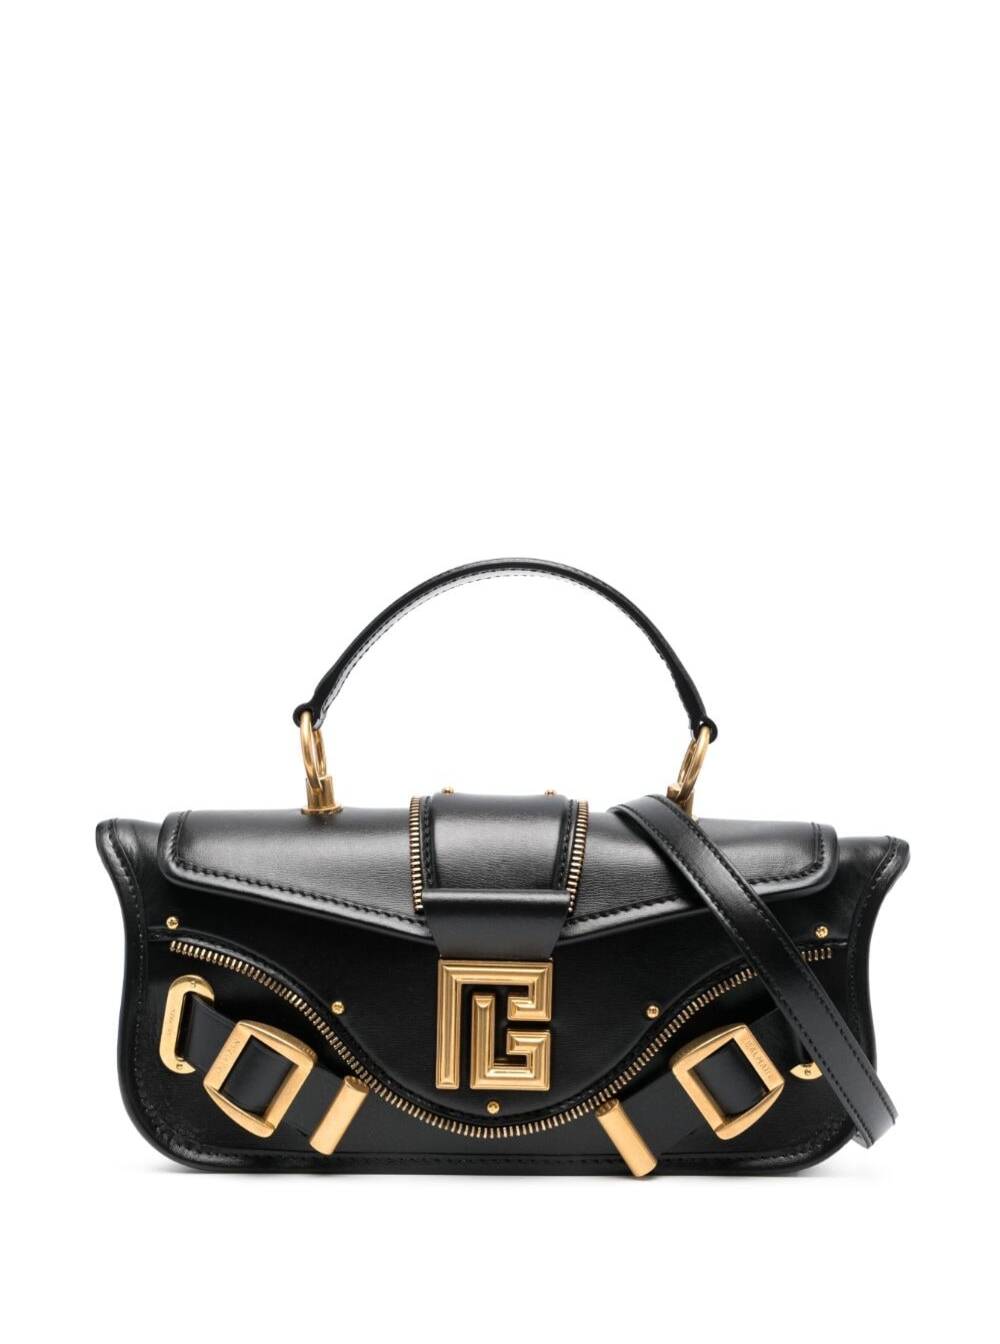 Balmain Blaze Black Clutch Bag With Pb Logo And Buckles In Smooth Leather Woman